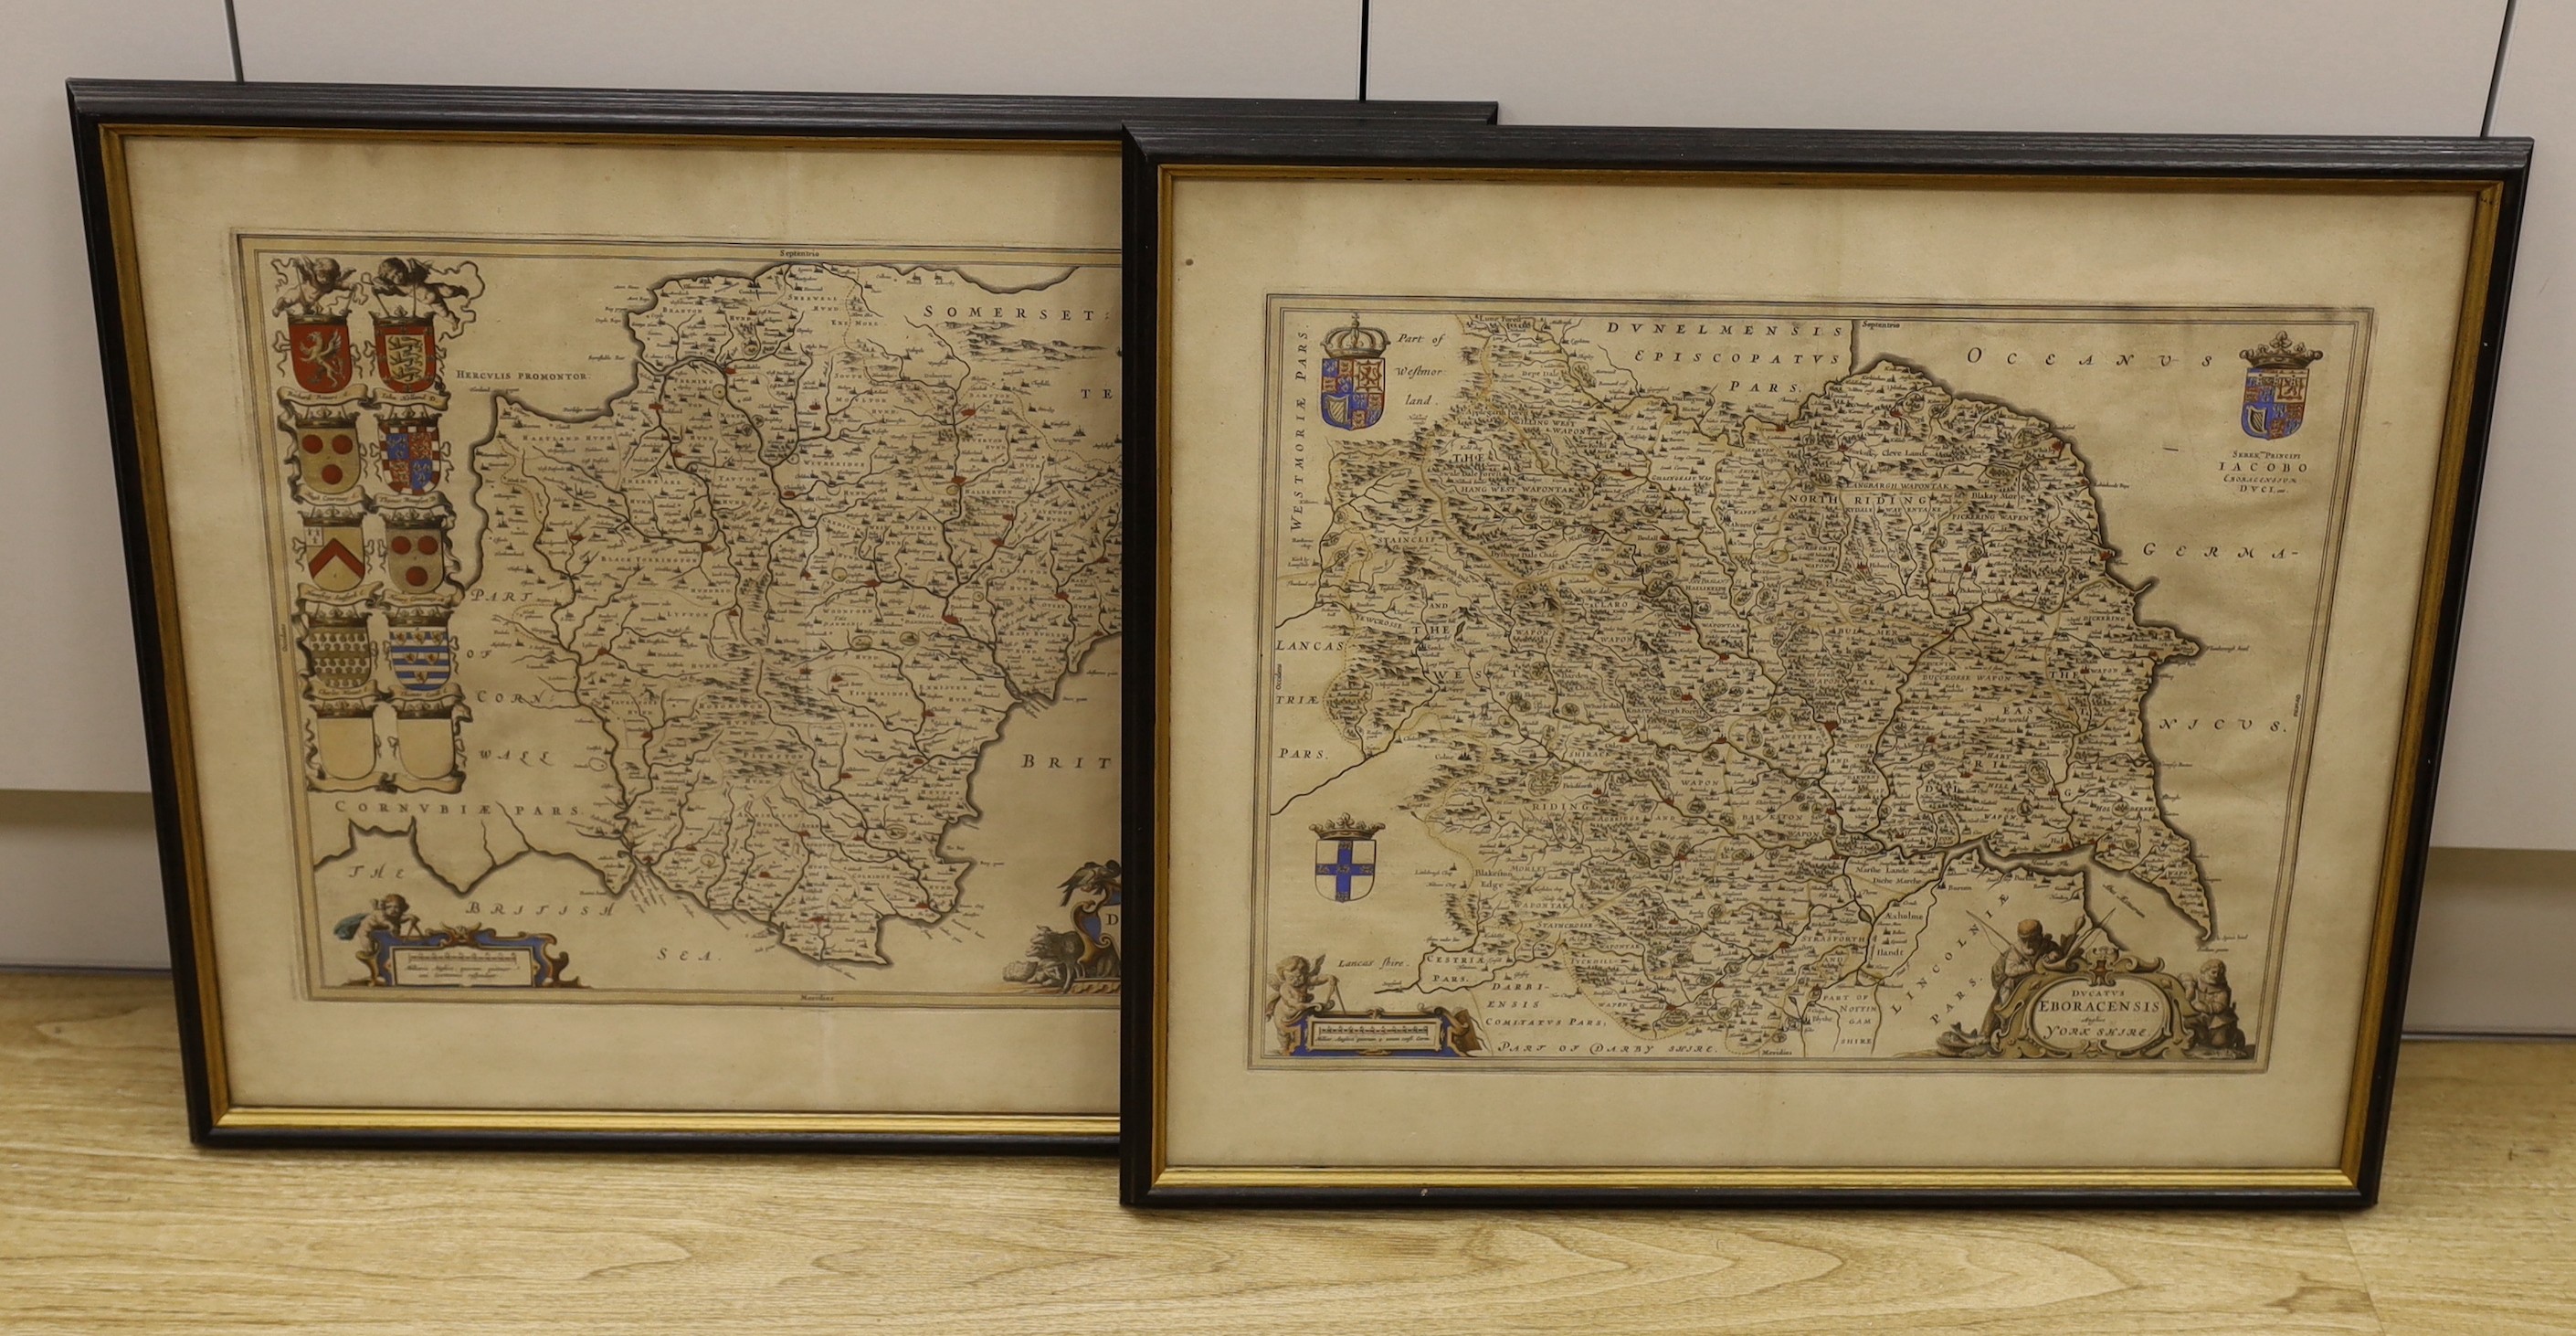 Johannes Blaeu, two coloured engravings, Maps of Devonia and Eboracensis (Yorkshire), overall 50 x 58cm (later impressions)